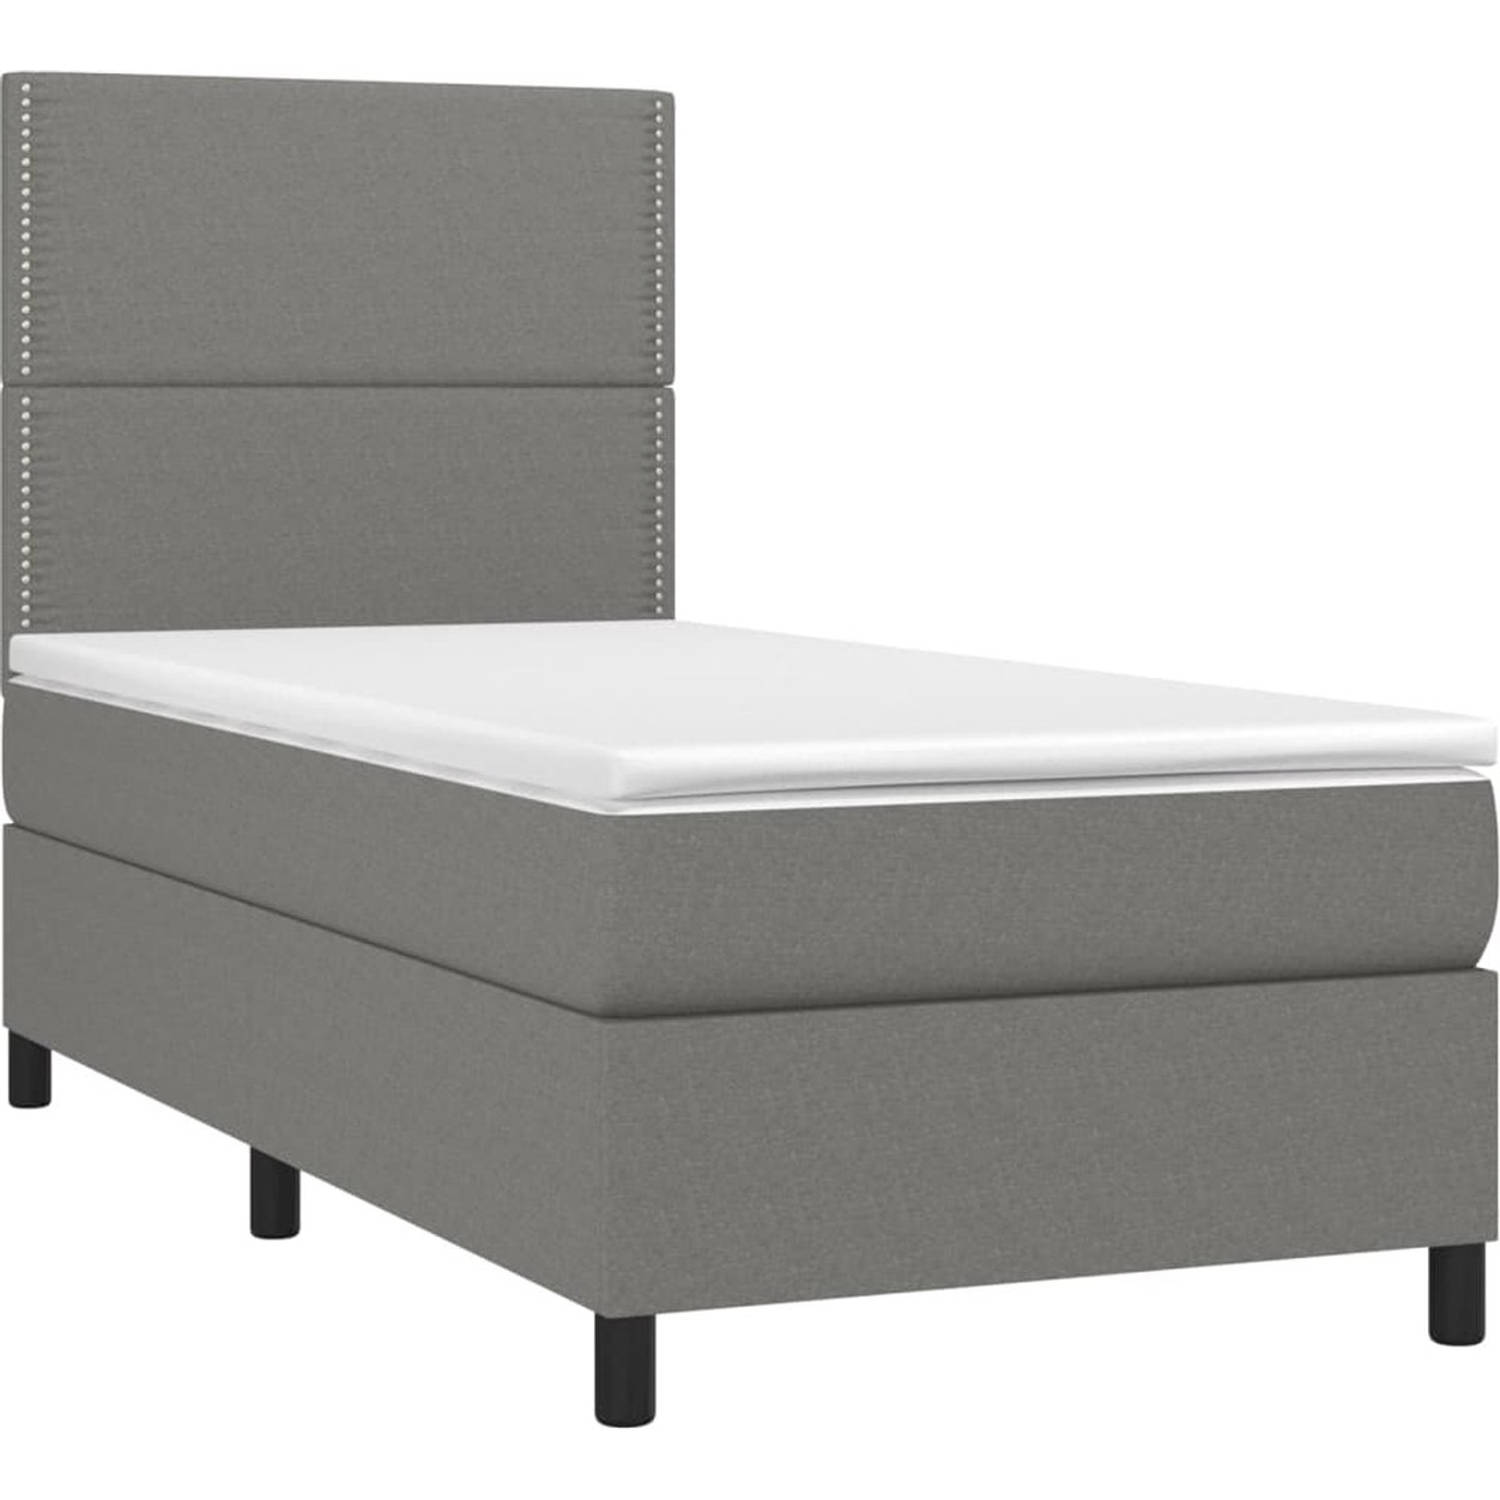 The Living Store Boxspringbed - donkergrijs - 90 x 190 cm - duurzaam